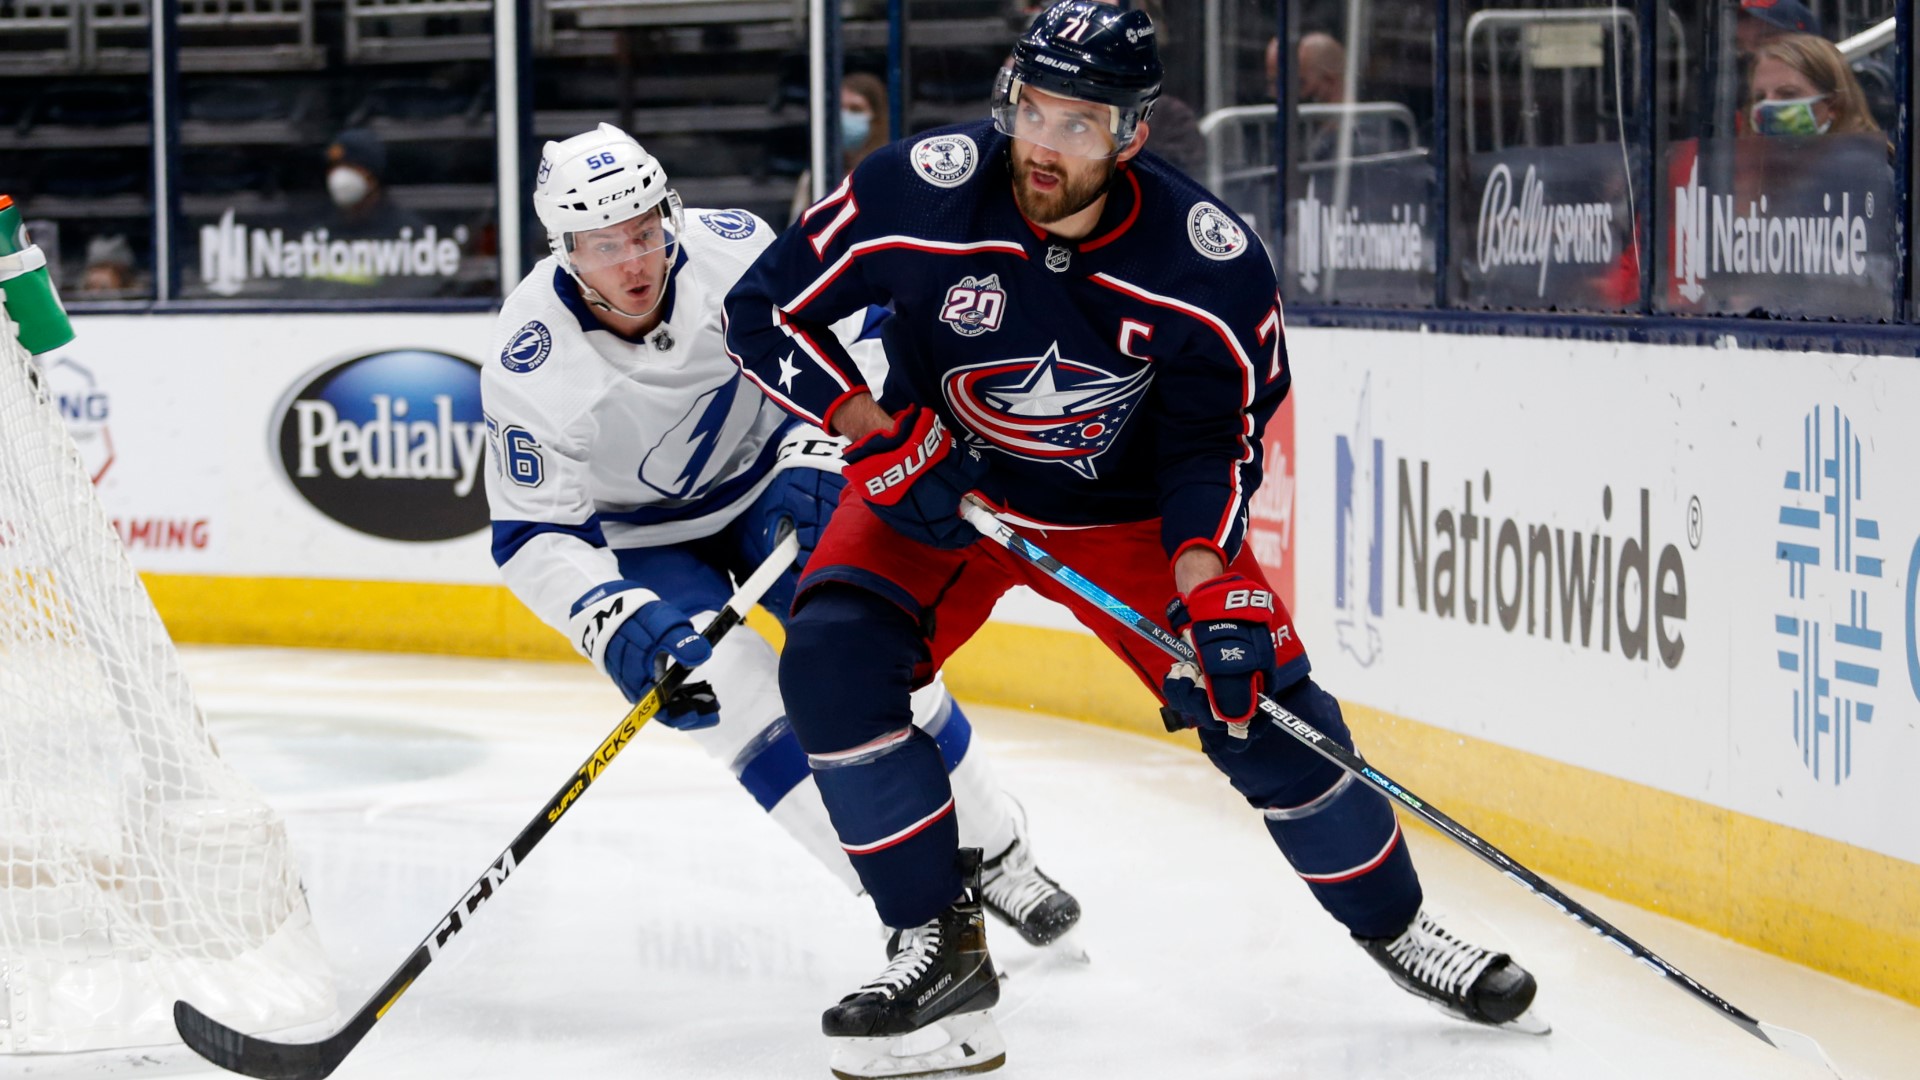 10TV's Dom Tiberi talks with Aaron Portzline of the Athletic about the Blue Jackets' moves leading up to the NHL trade deadline and what is coming up next.